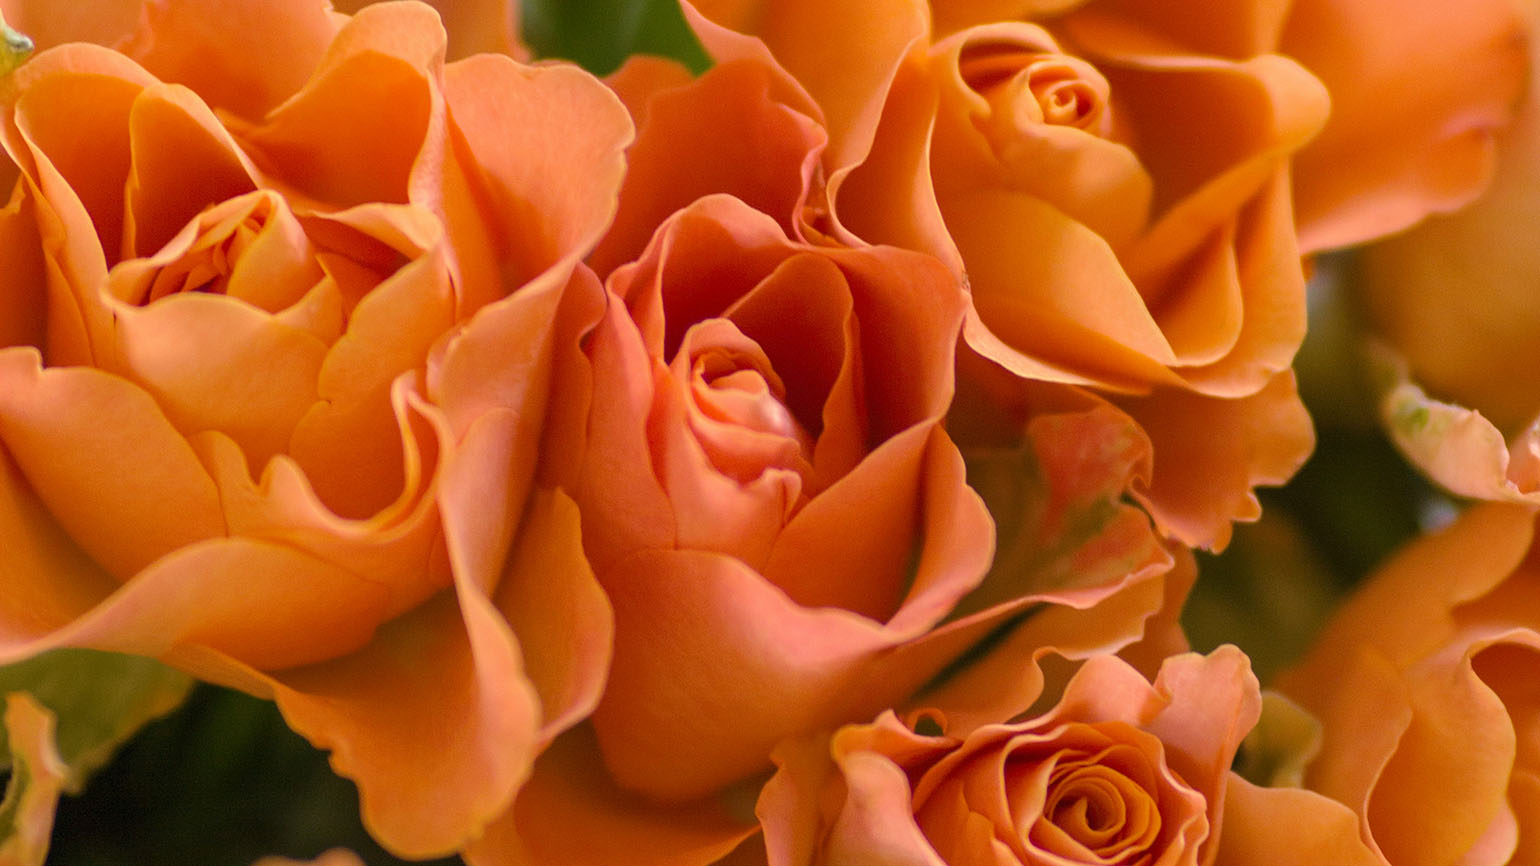 A beautiful bunch of bright orange roses signify a fragrant offering.